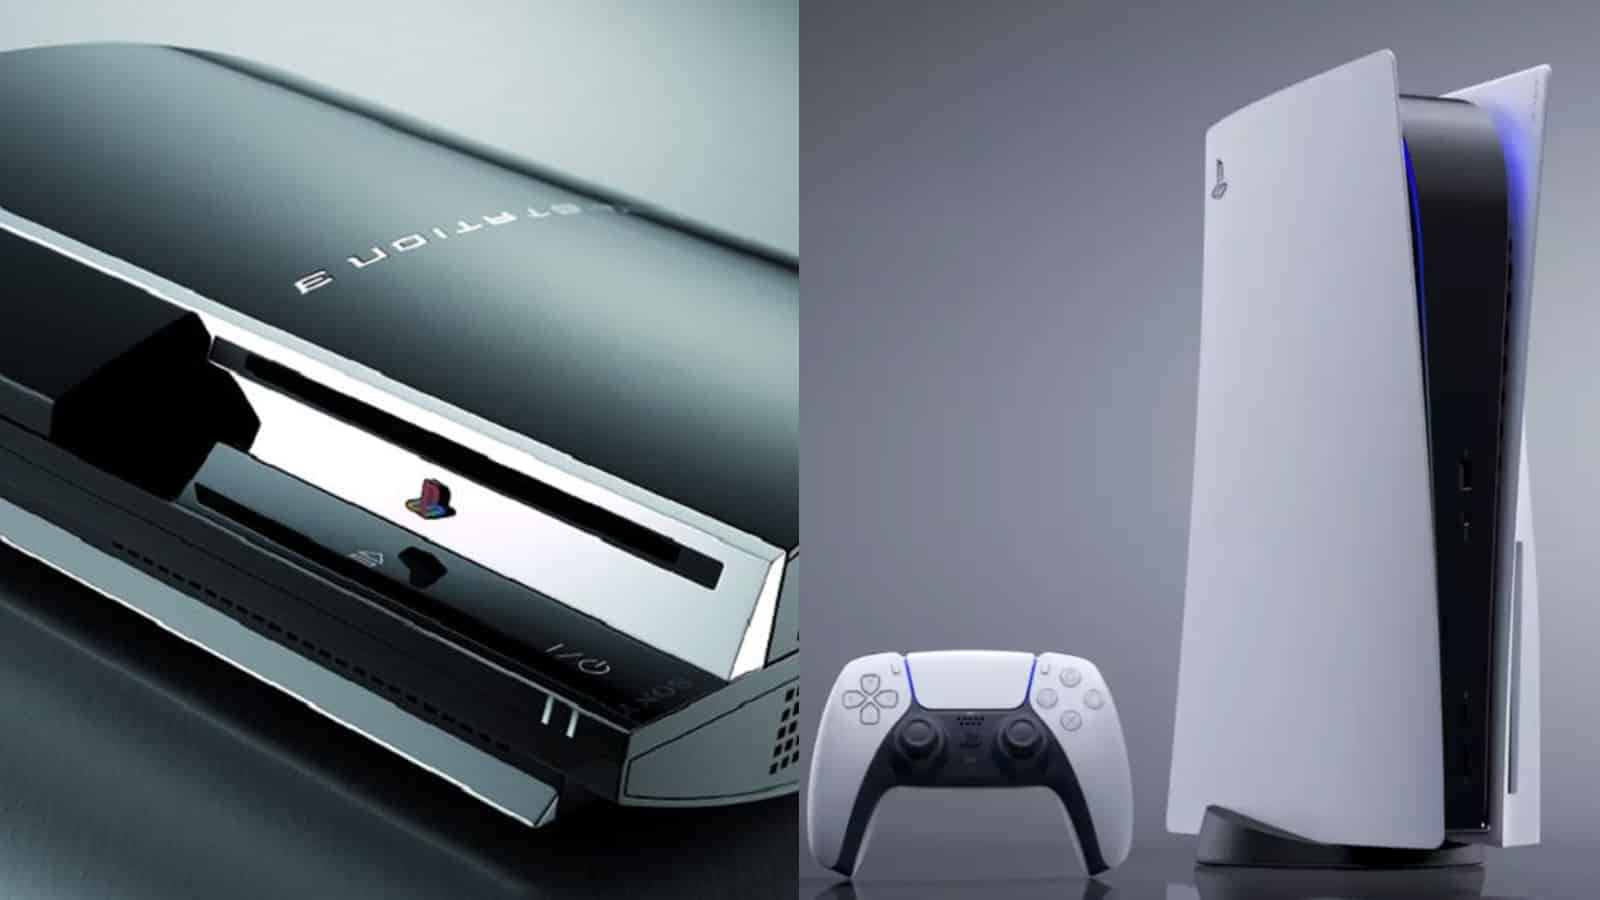 an image of the ps3 and ps5